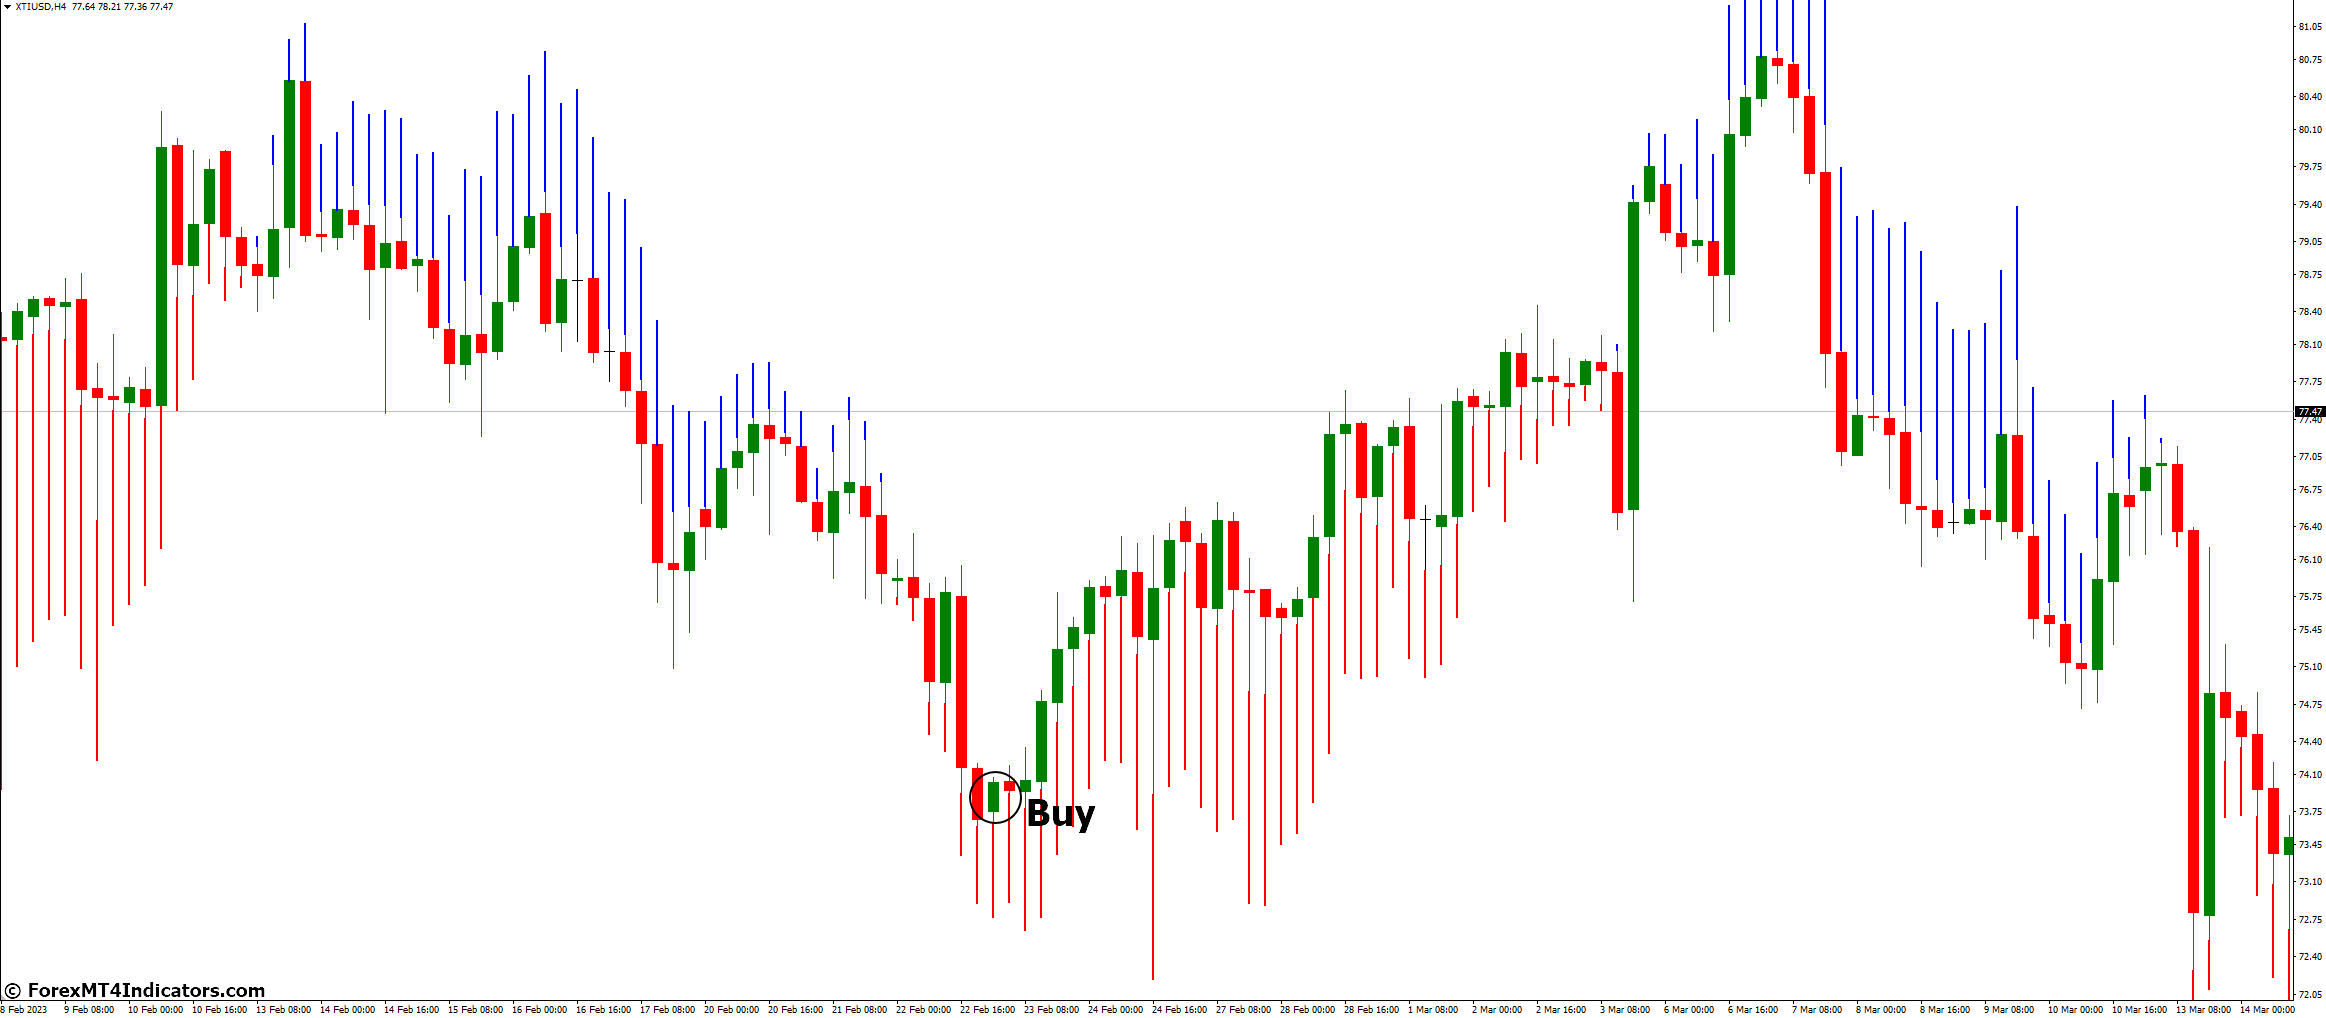 How to Trade with Trend Manager Indicator - Buy Entry